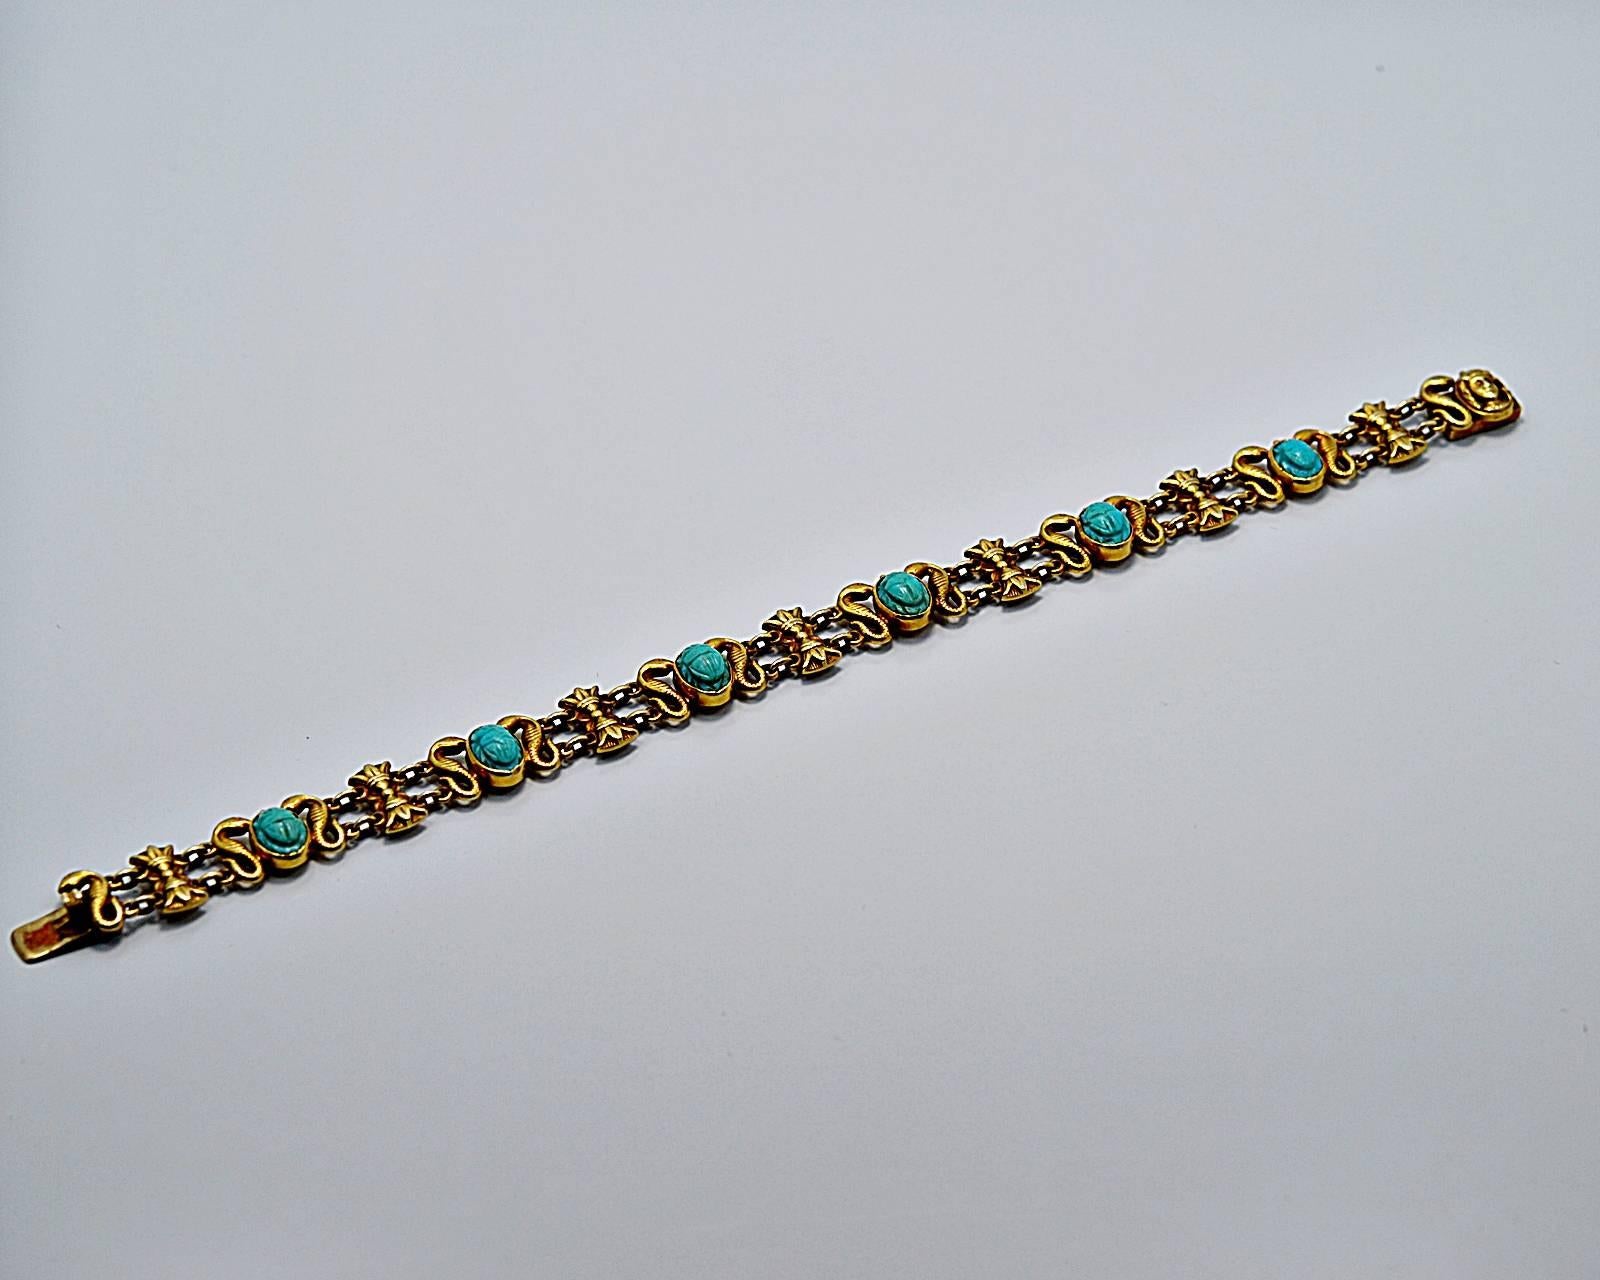 In our Tampa store this item retails for $4,495.

An Art Deco Egyptian revival Persion turquoise bracelet that features six 7.5mm x 5.5mm turquoise scarabs with alternating serpents and sheaves of wheat. At the clasp is a head of a Pharoah.